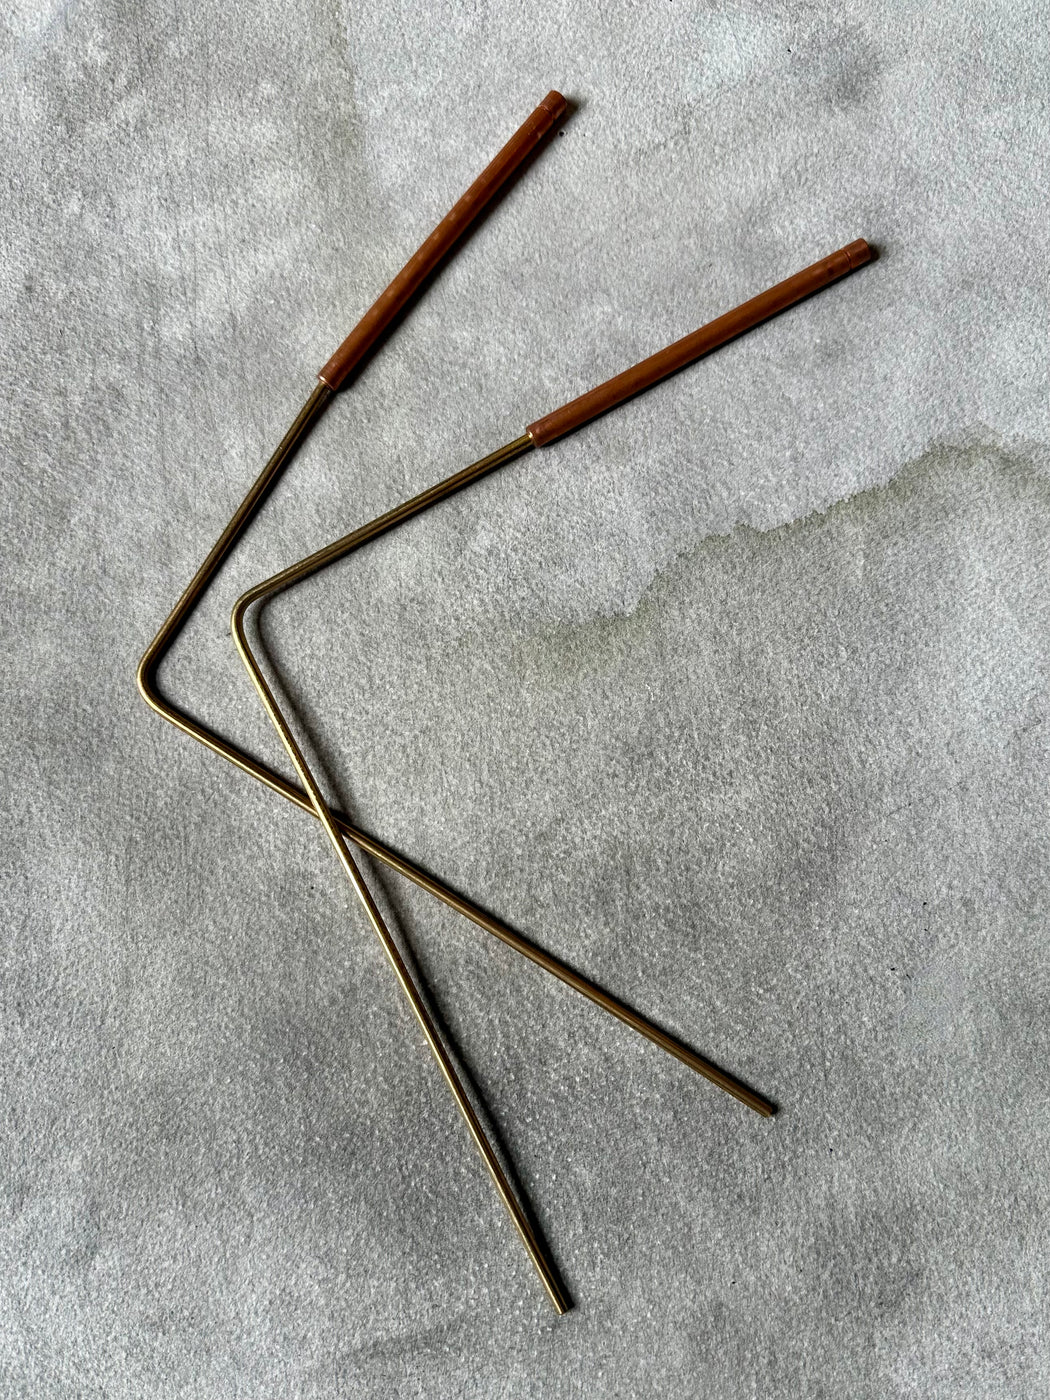 Copper-Handled Dowsing Rods